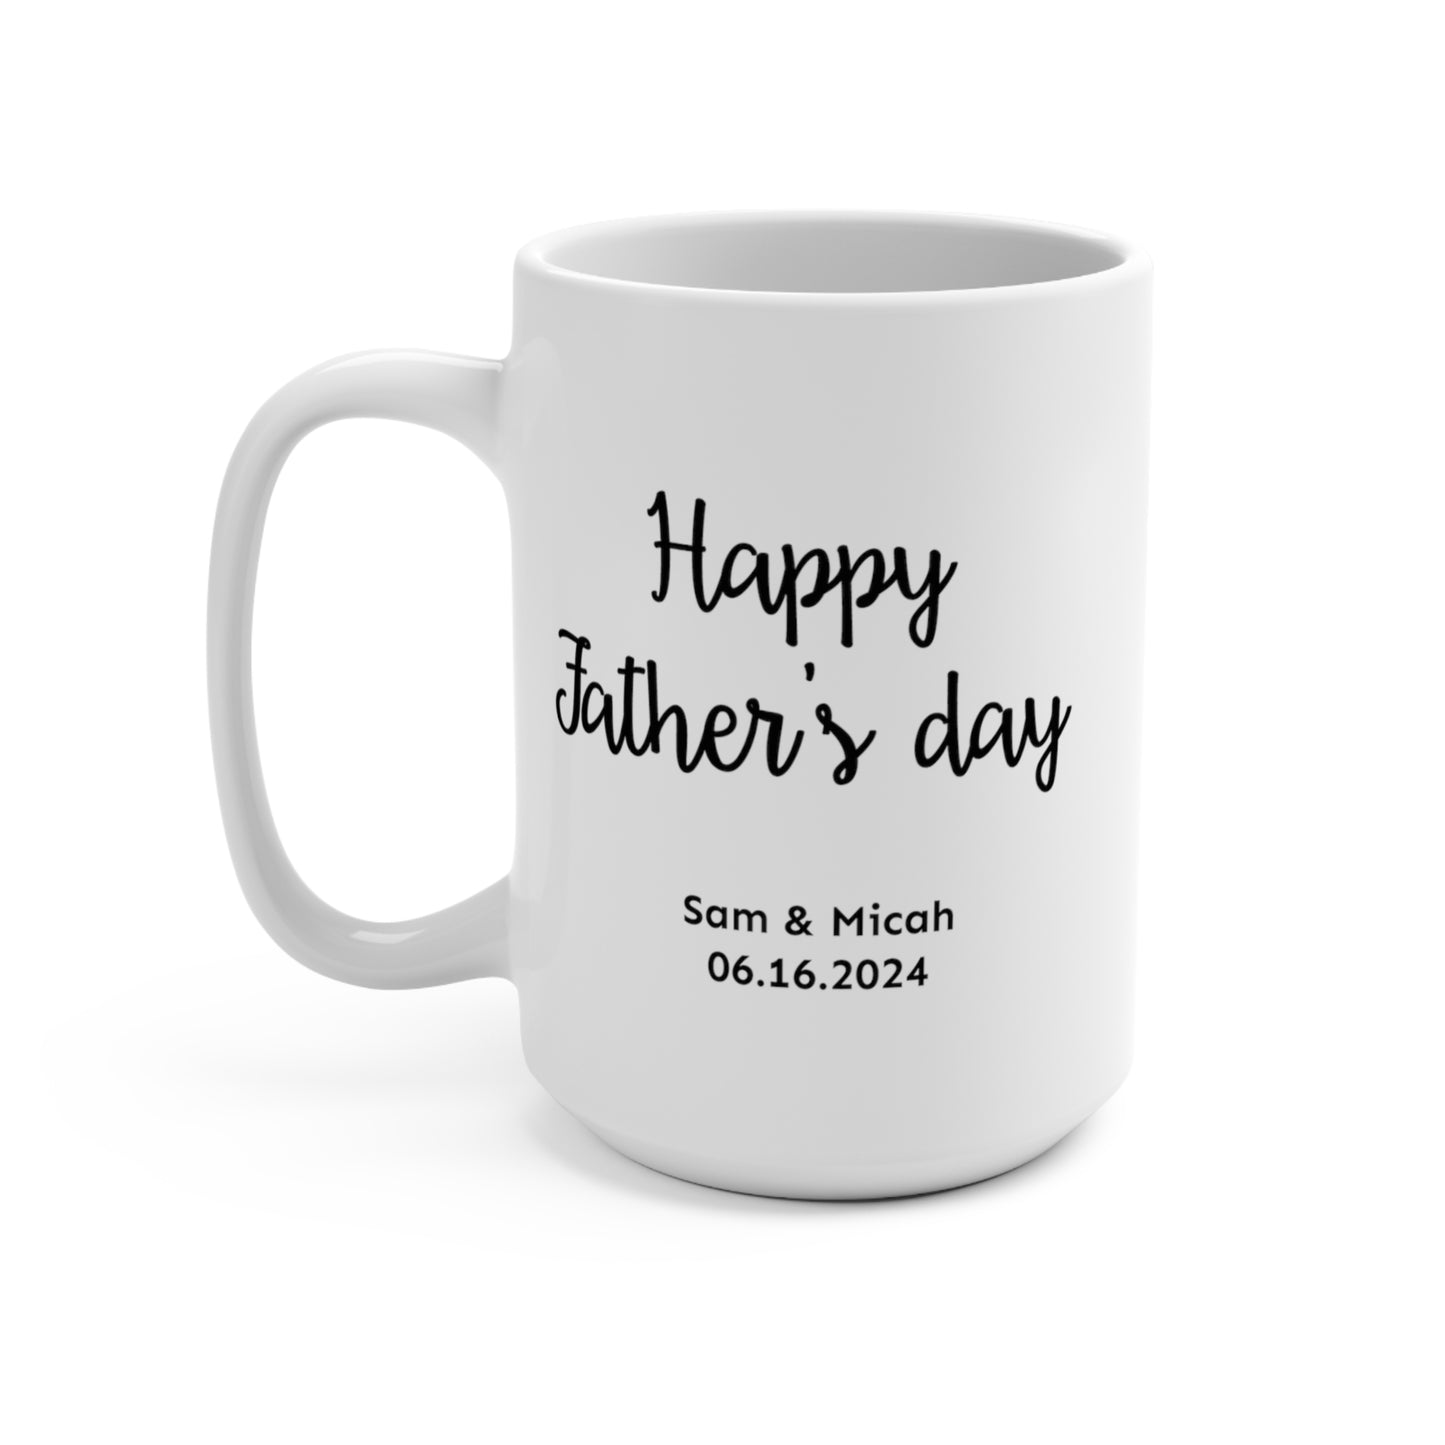 Personalized Hilarious Father's Day Mug